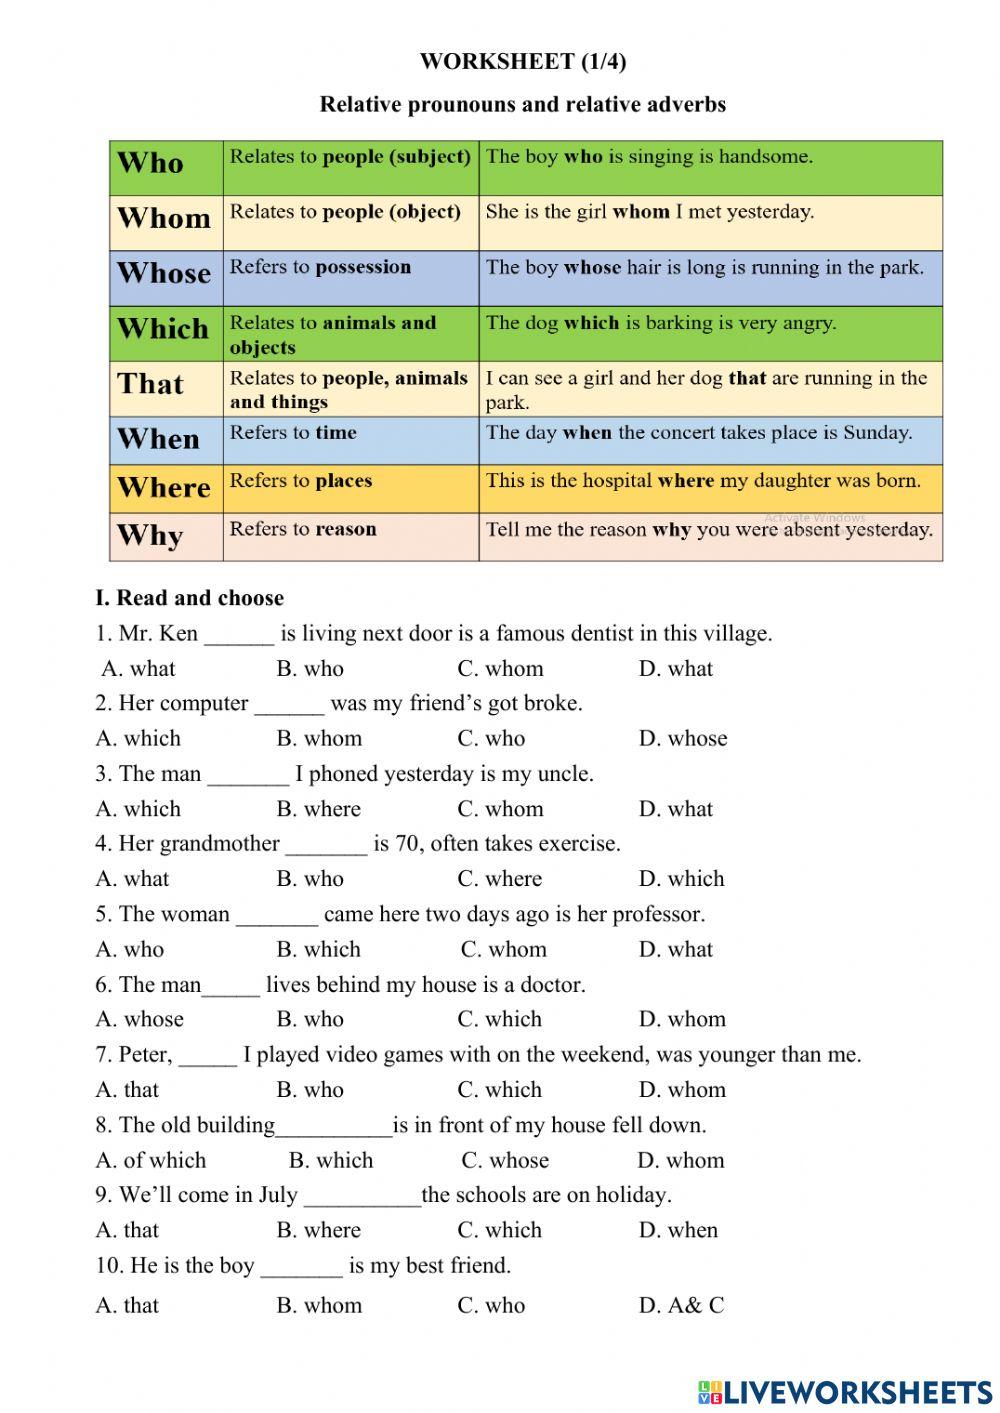 Relative pronouns and relative adverbs